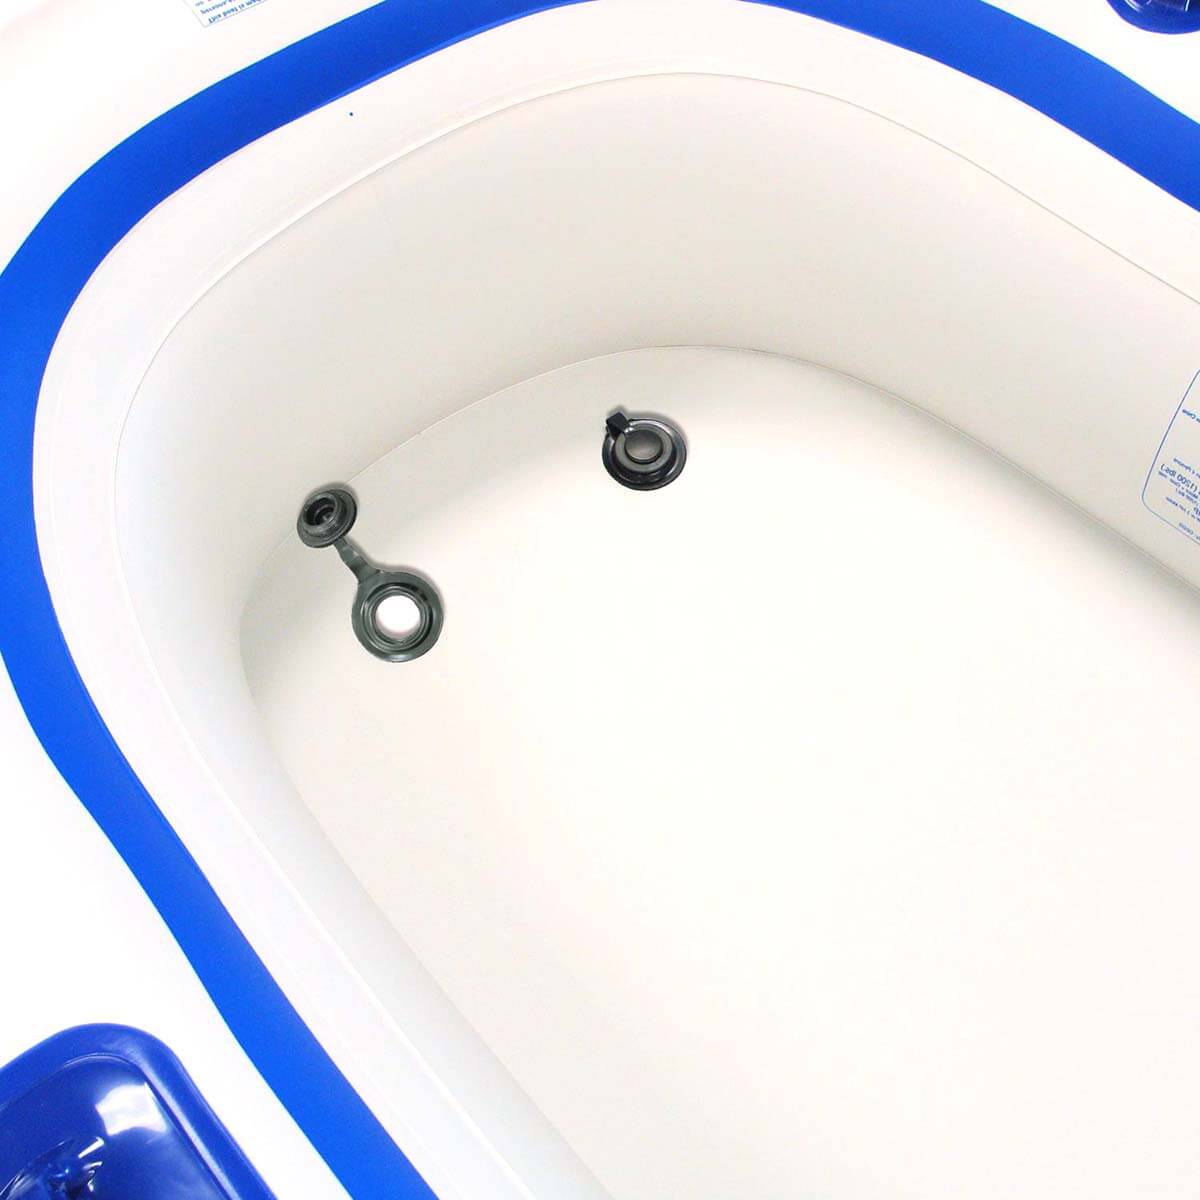 The Sea Eagle SE 9 has two easy to open and shut floor drains.